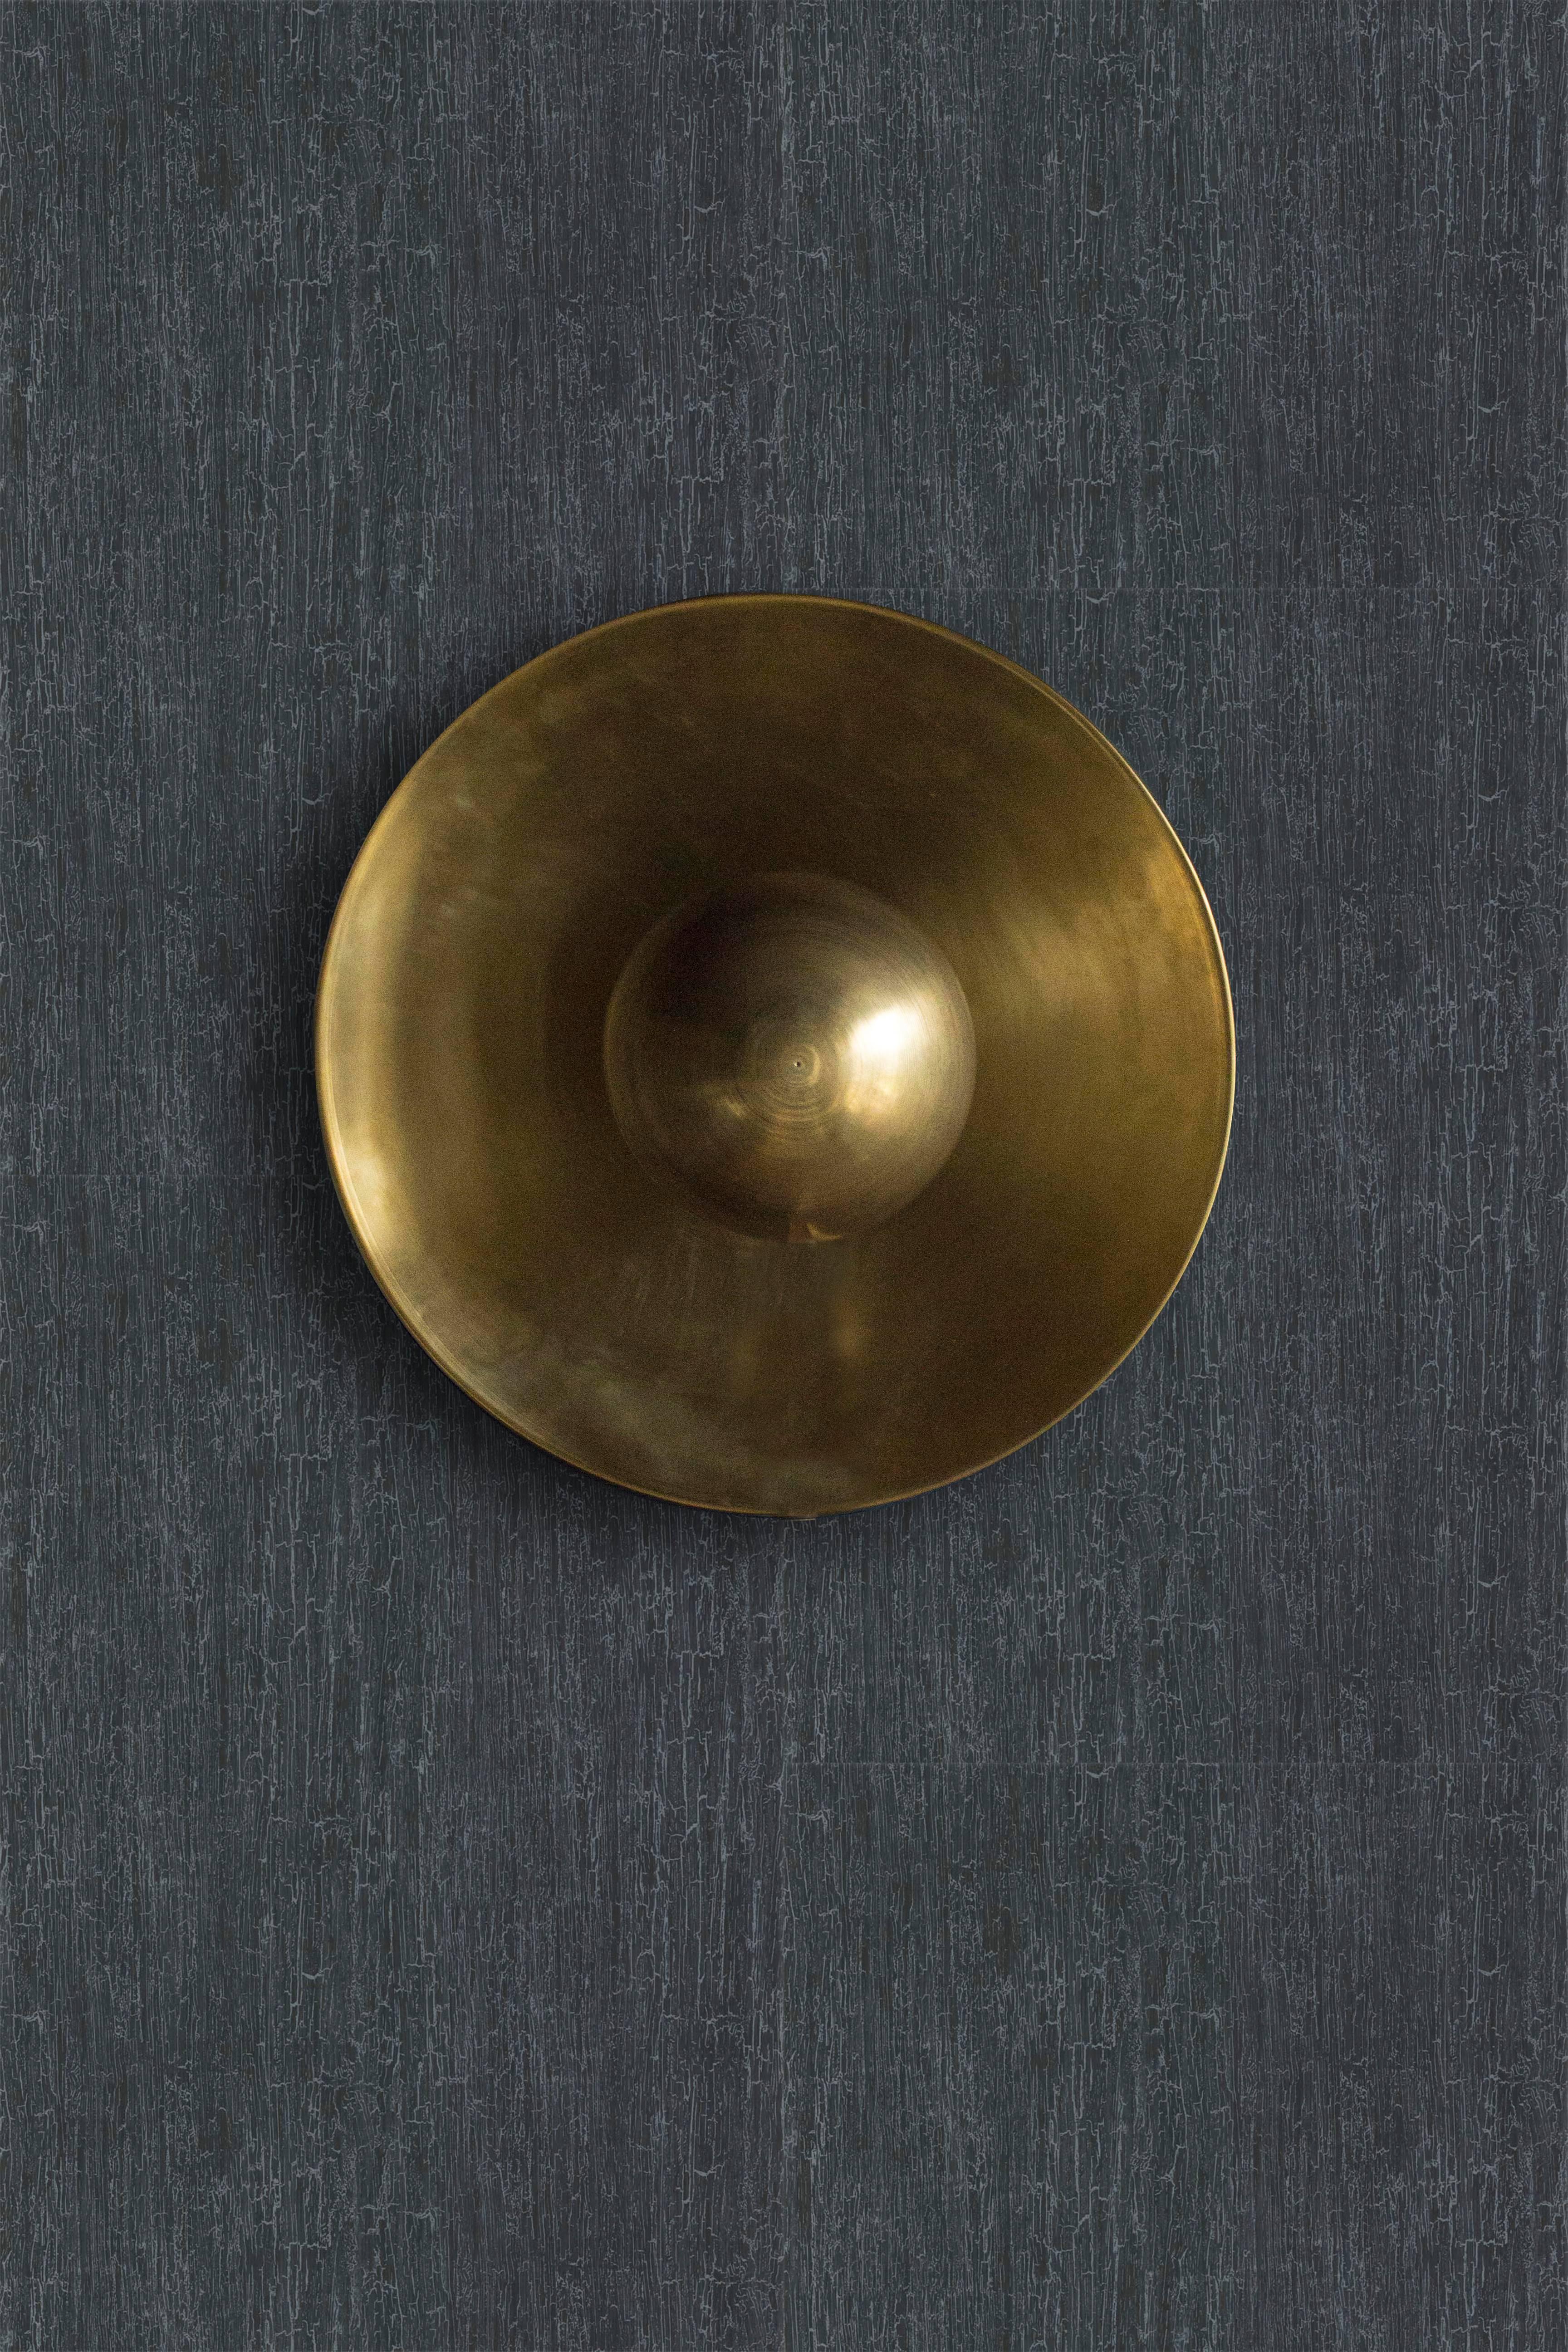 Metropolis brass sconce lamp by Jan Garncarek

Dimensions: 36 x 36 x 18 cm
Material: Brass
Handcrafted by Jan Garncarek.
Signed and Numbered

Information:
weight: 4 kg / 9 lb
voltage: 120V, 240V
lamping: 3 x E27, 60W, 50-60Hz
lumens:300